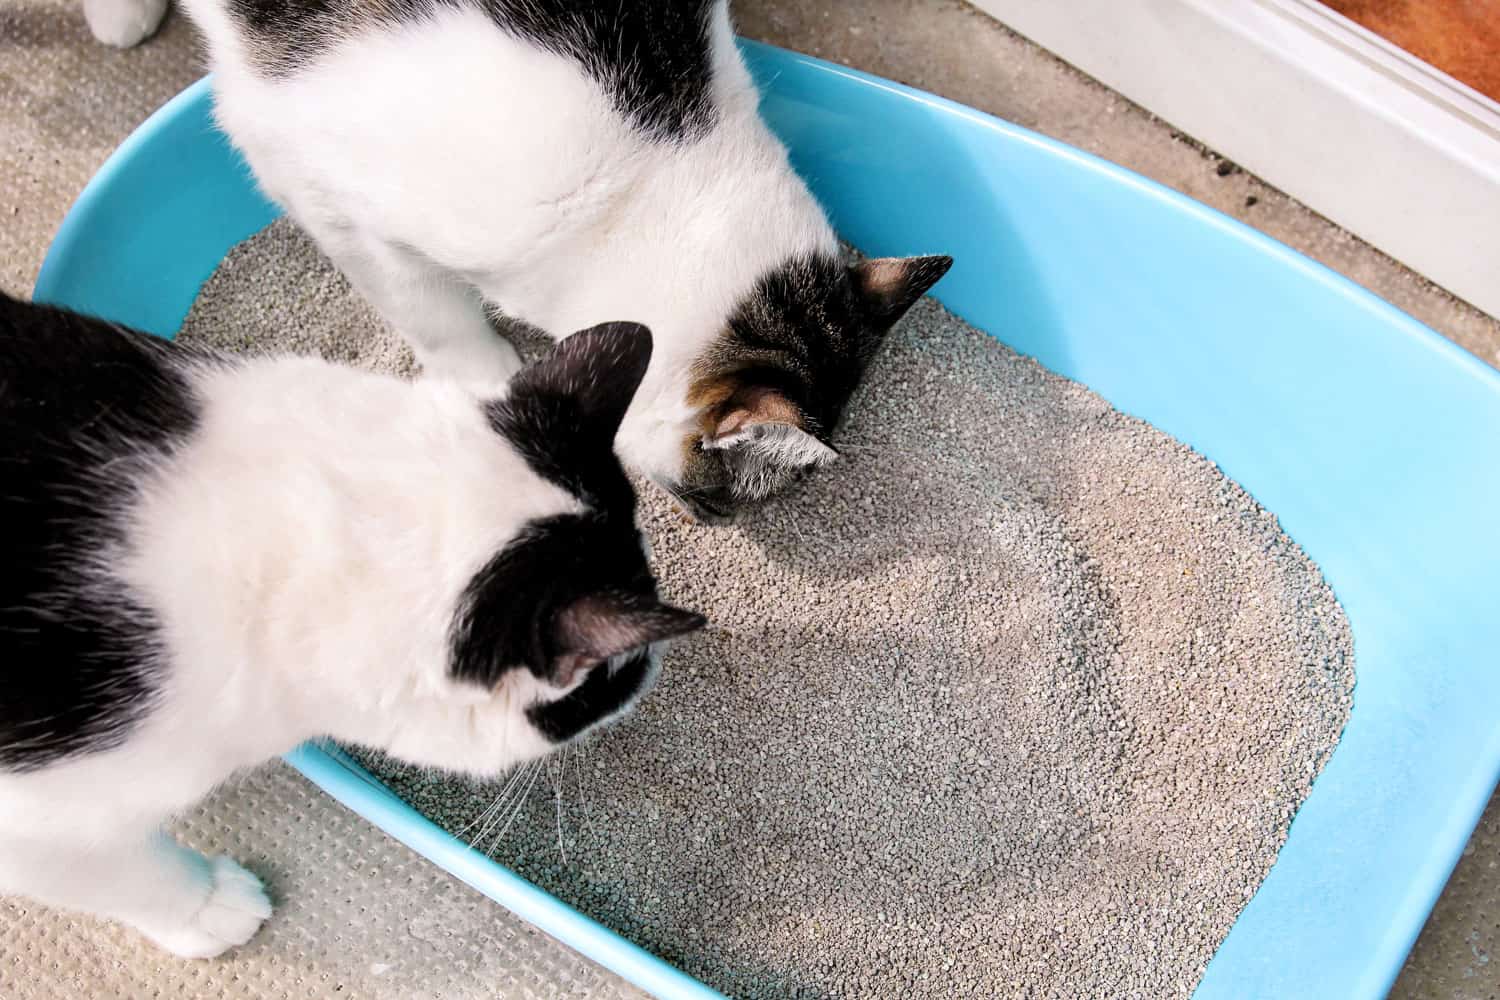 Cat smelling cat litter - What Is The White Stuff In Your Cat's Litter Box? (Inc. From Urine, In Feces, & Environmental Contaminants)